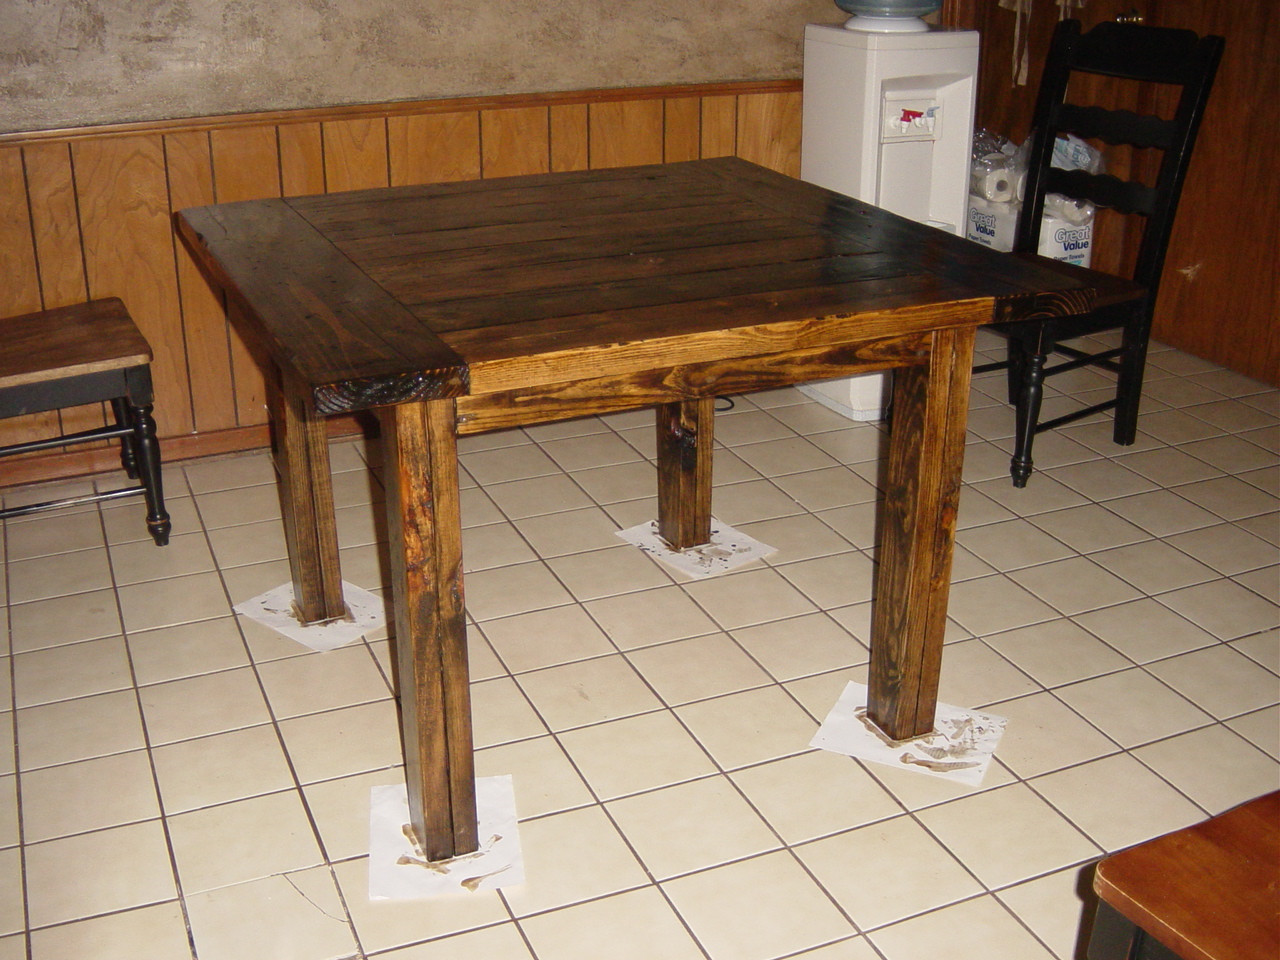 DIY Kitchen Table Plans
 See the Do it yourself kitchen table plans